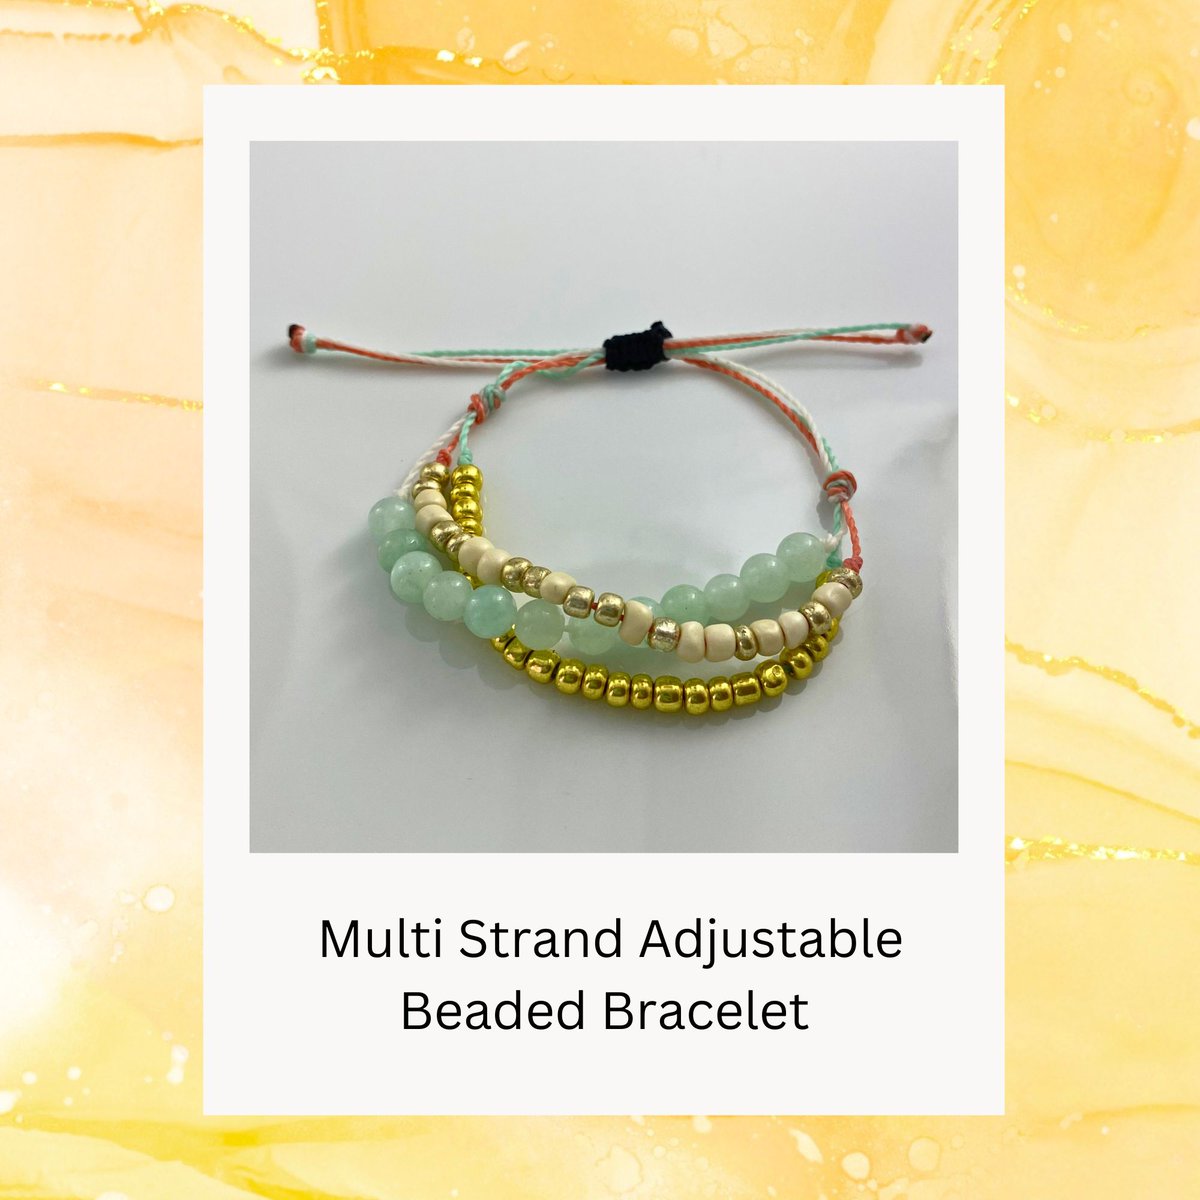 Handcrafted with love, this Adjustable Friendship Bracelet adds a touch of elegance to any outfit. ✨ Experience the beauty of Burmese Jade and Gold, a harmonious blend of nature's hues and timeless sophistication. 🌿💛
Visit us at Starfishbykristan.com

#SeedBeadBracelet